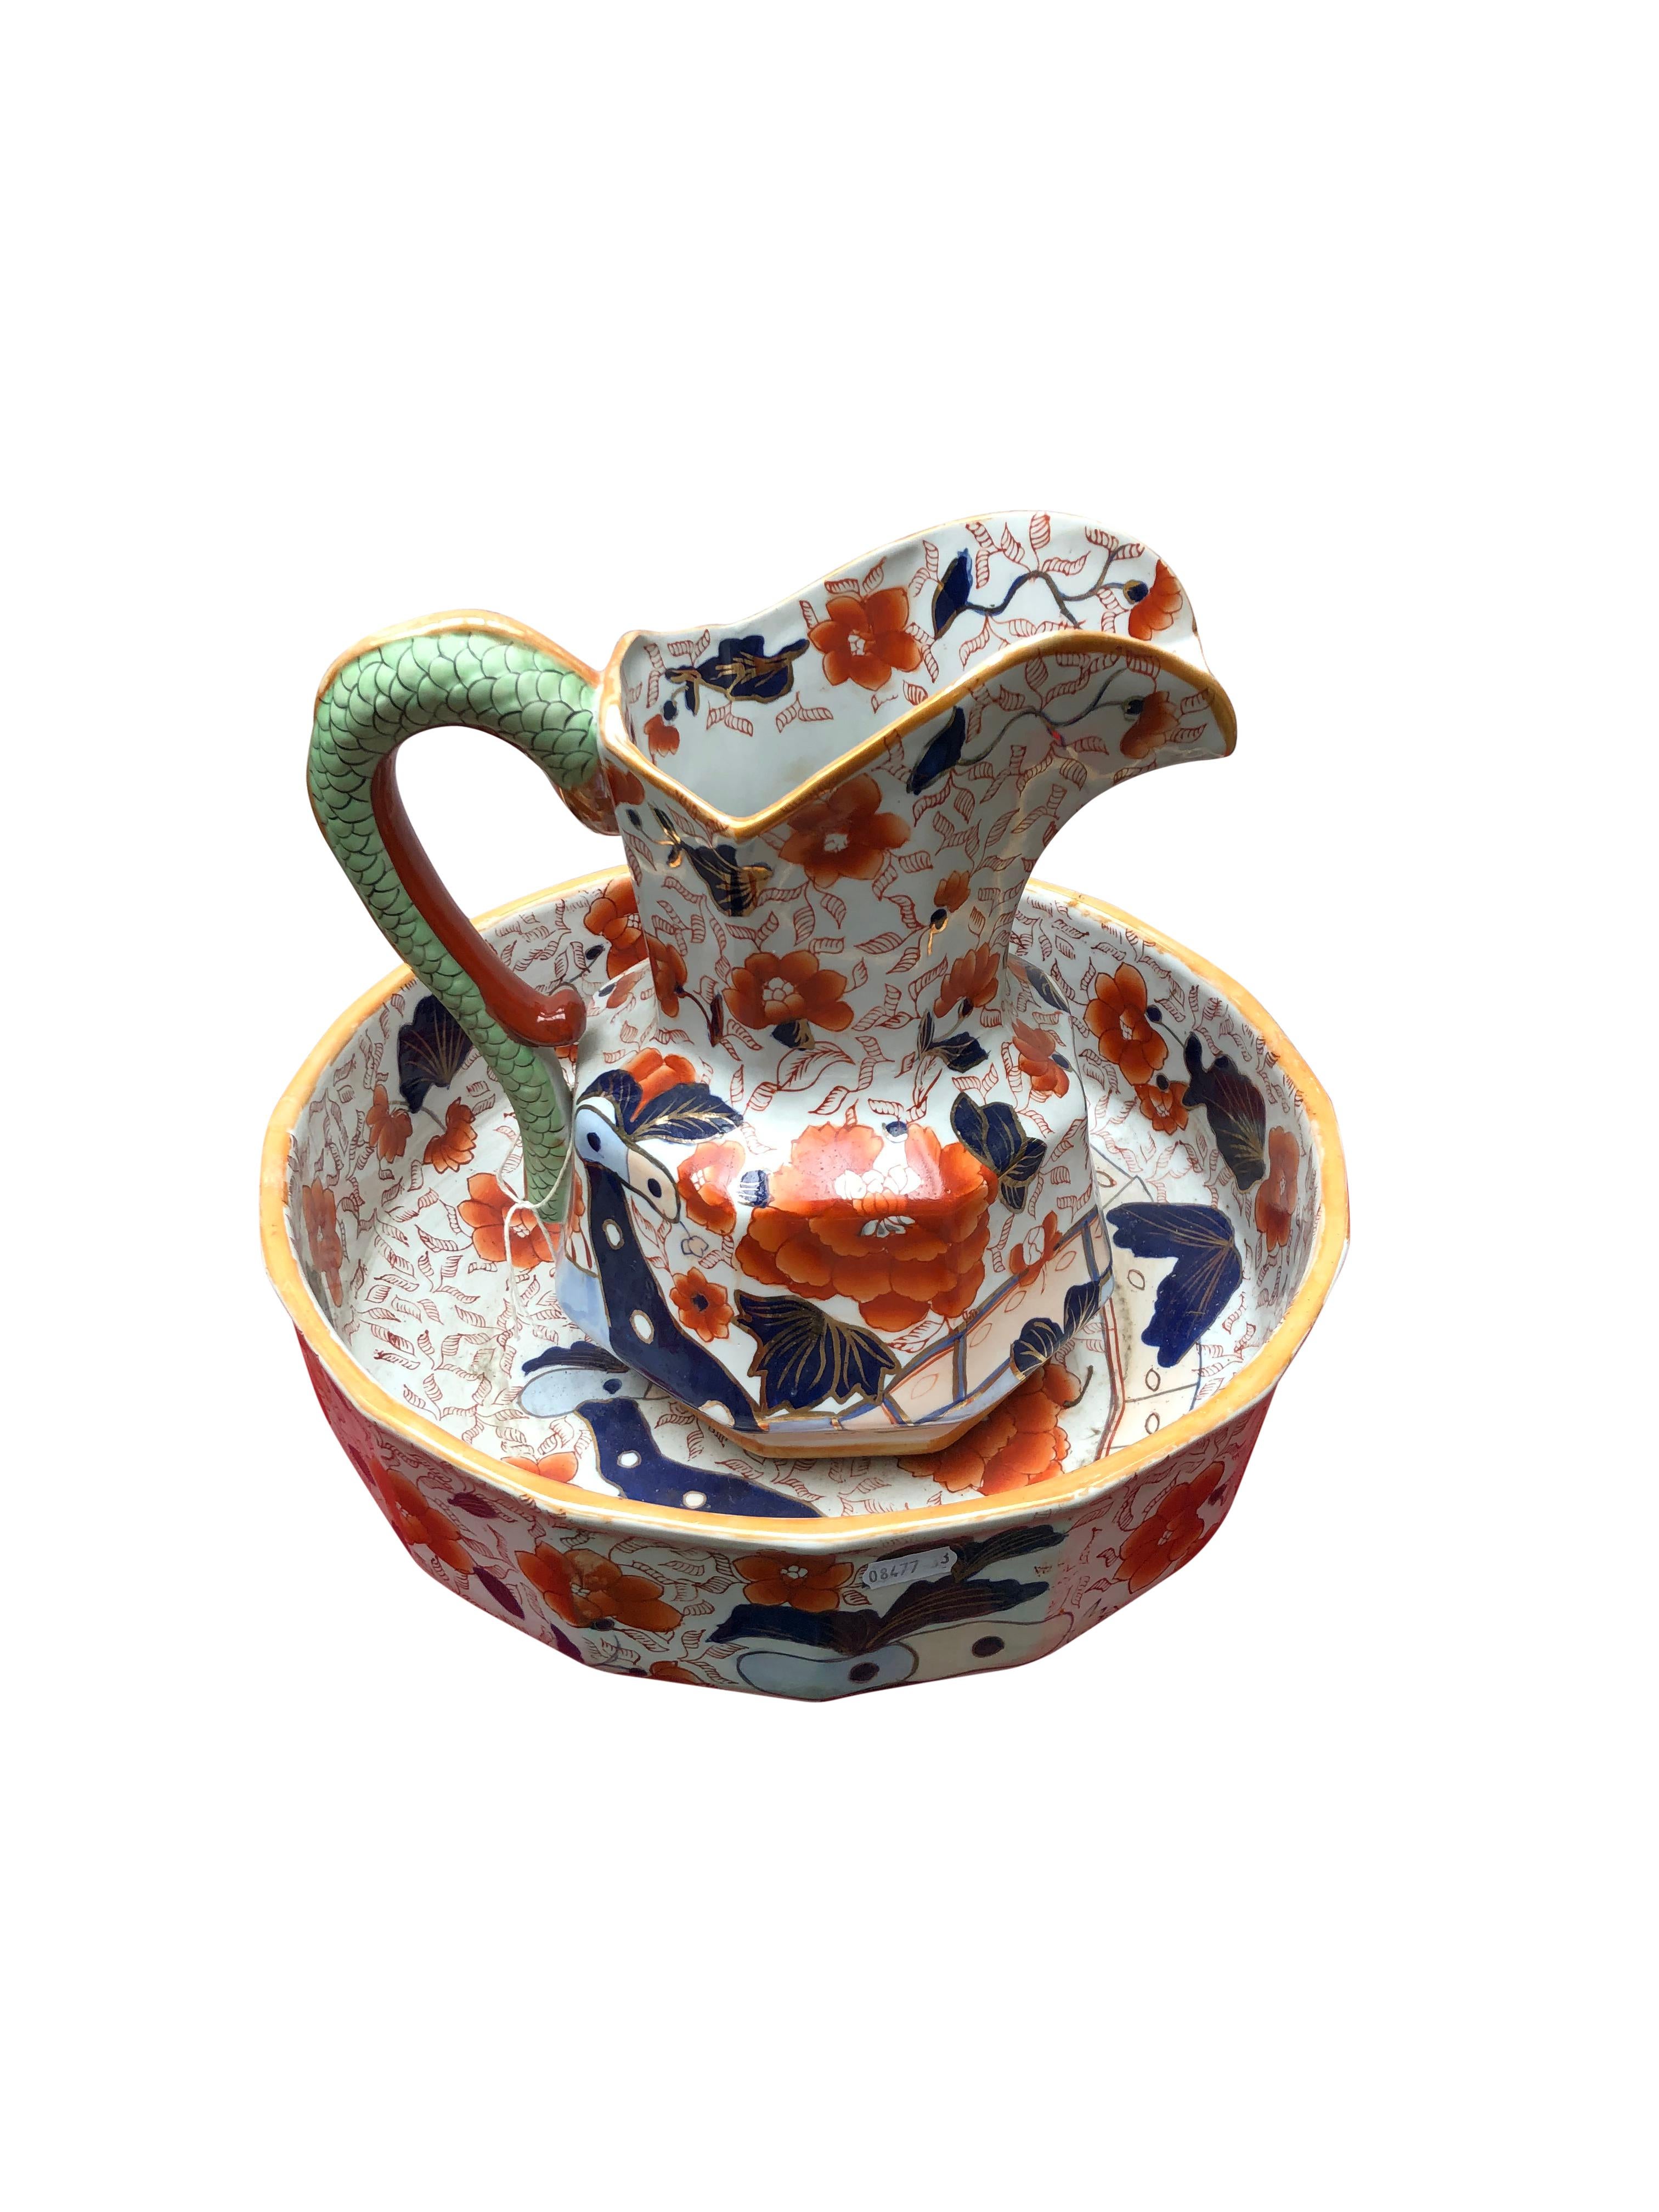 A fantastic Imari jug and bowel, 20th century. The pair is painted in an amazing Japanese style, with bright blue and red floral decorations, and a green scaled handle. Offered in excellent condition, ready for home use right away.